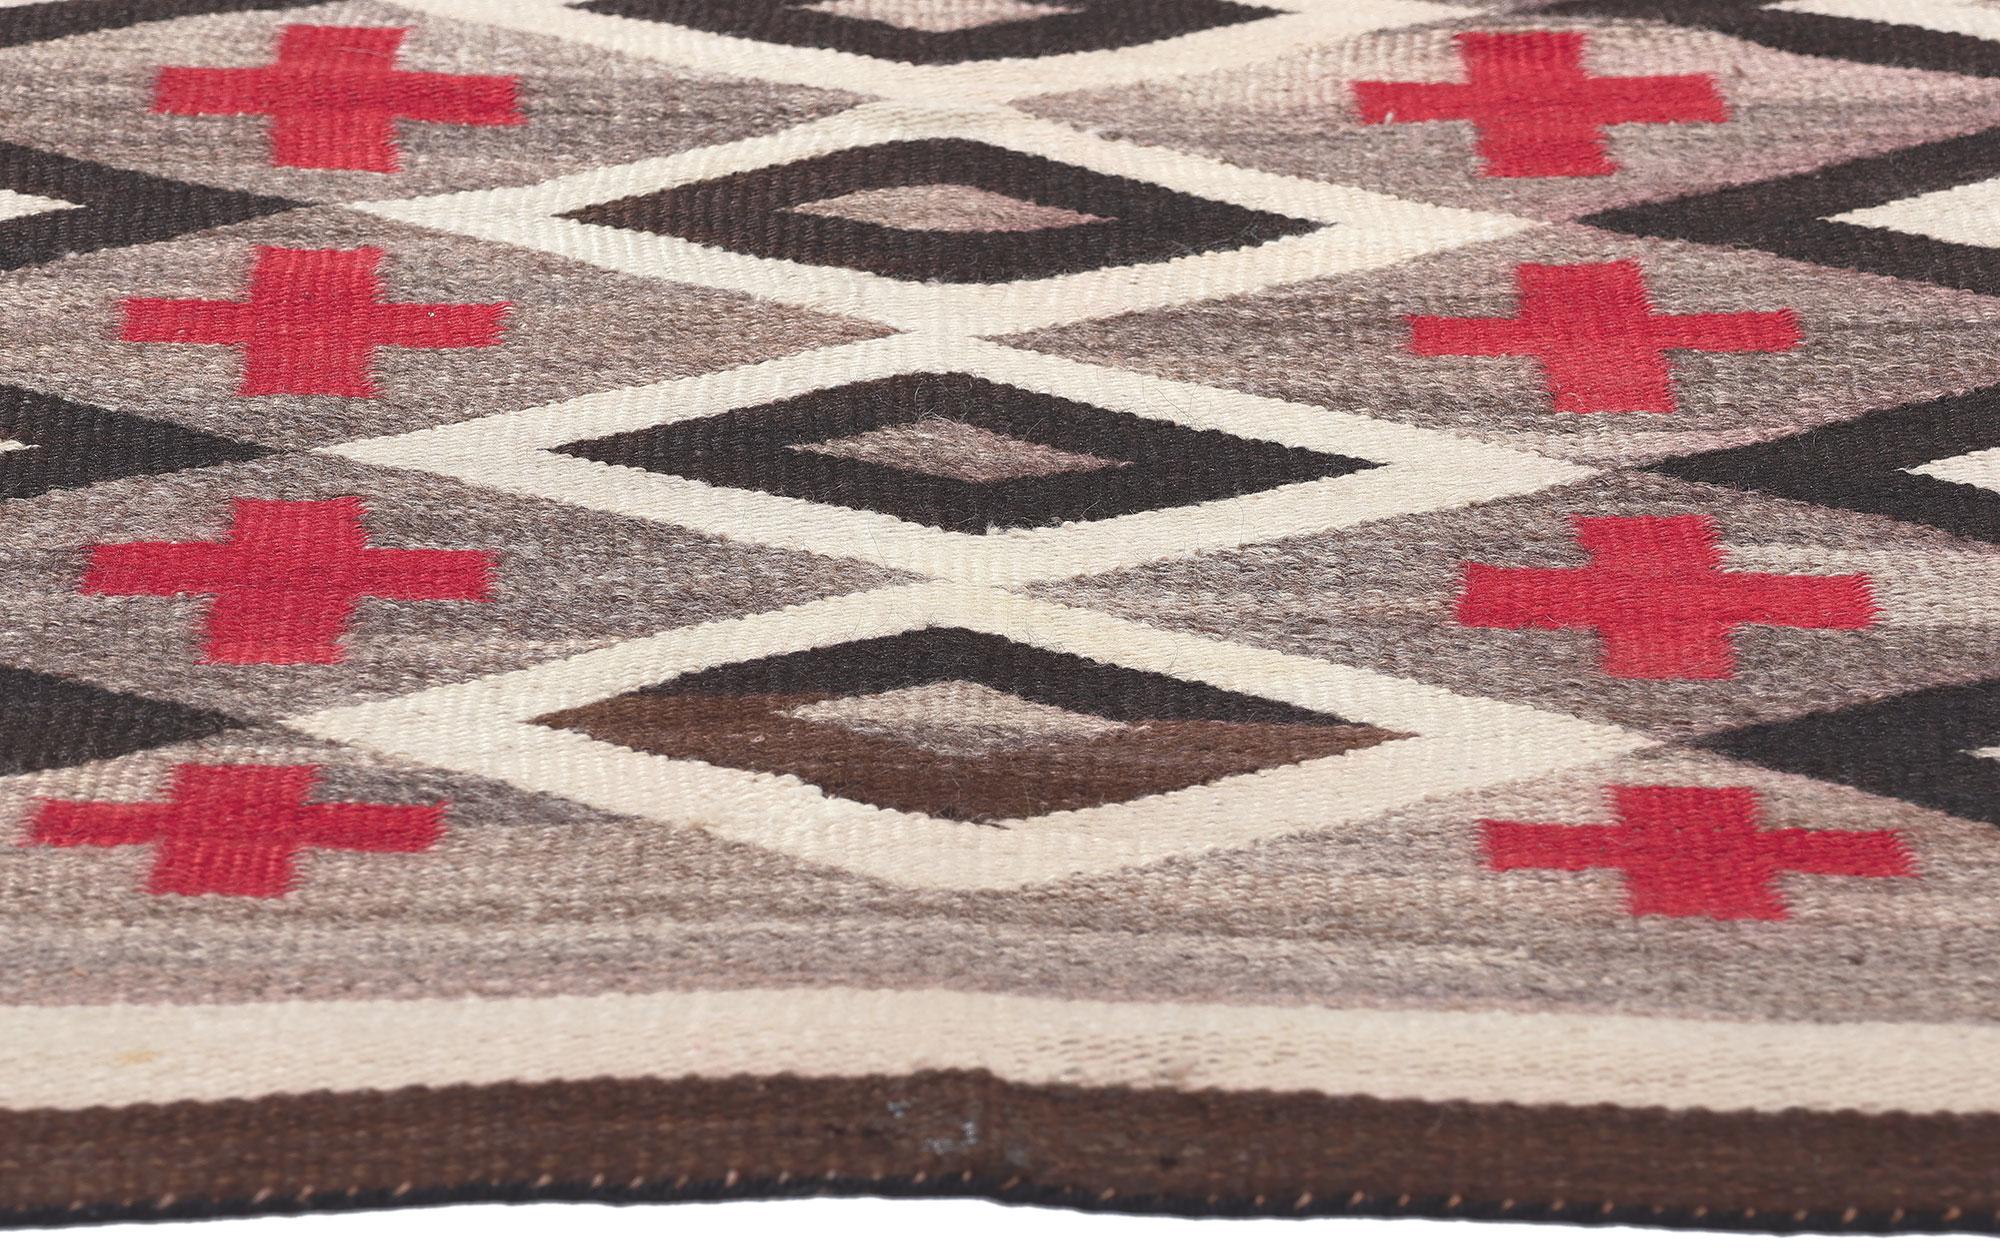 Hand-Woven Antique Ganado Navajo Rug, Southwest Style Meets Native American For Sale